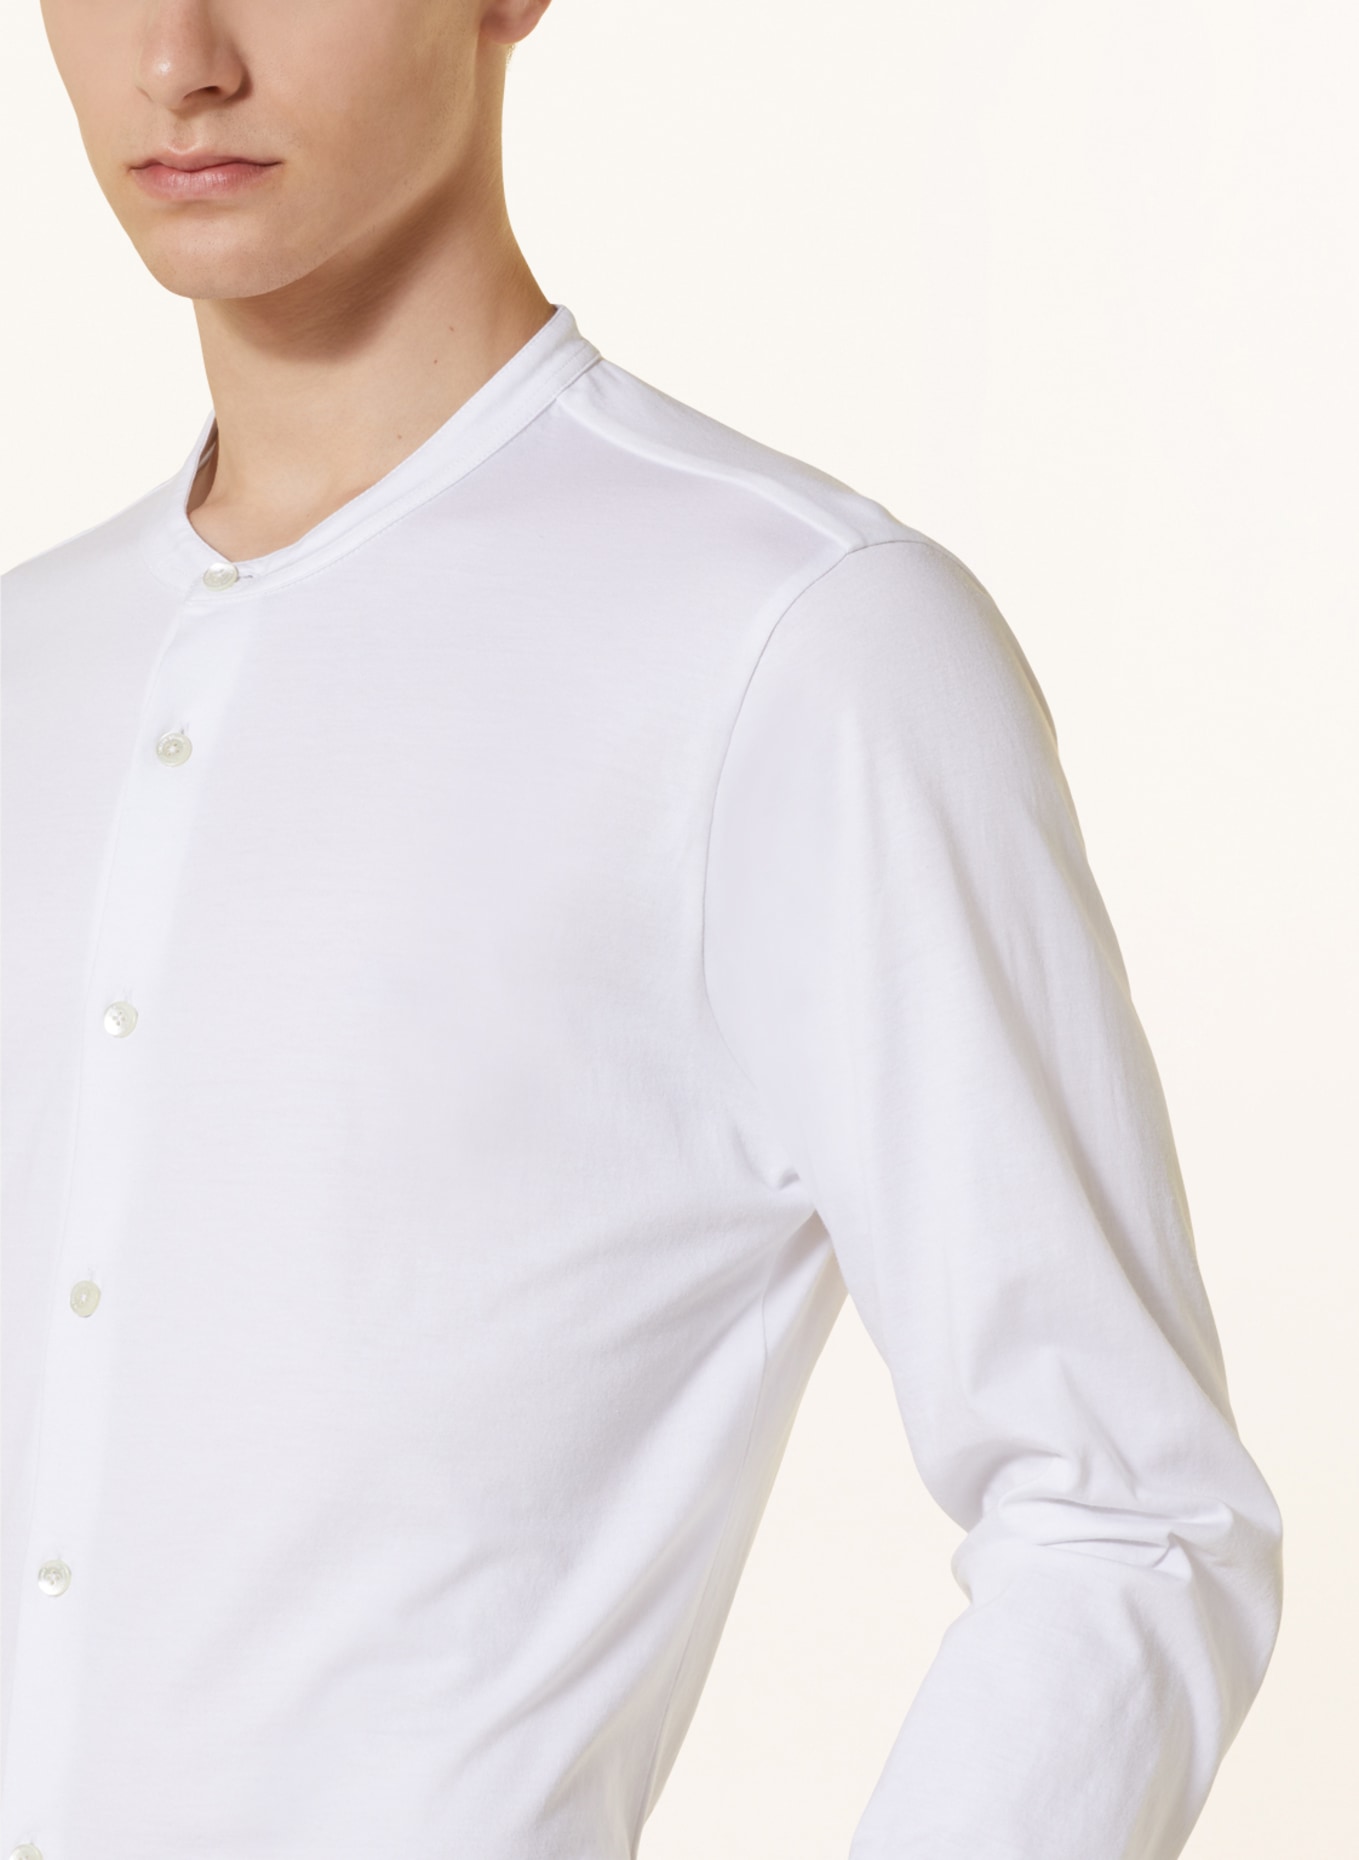 Stefan Brandt Jersey shirt slim fit with stand-up collar, Color: WHITE (Image 4)